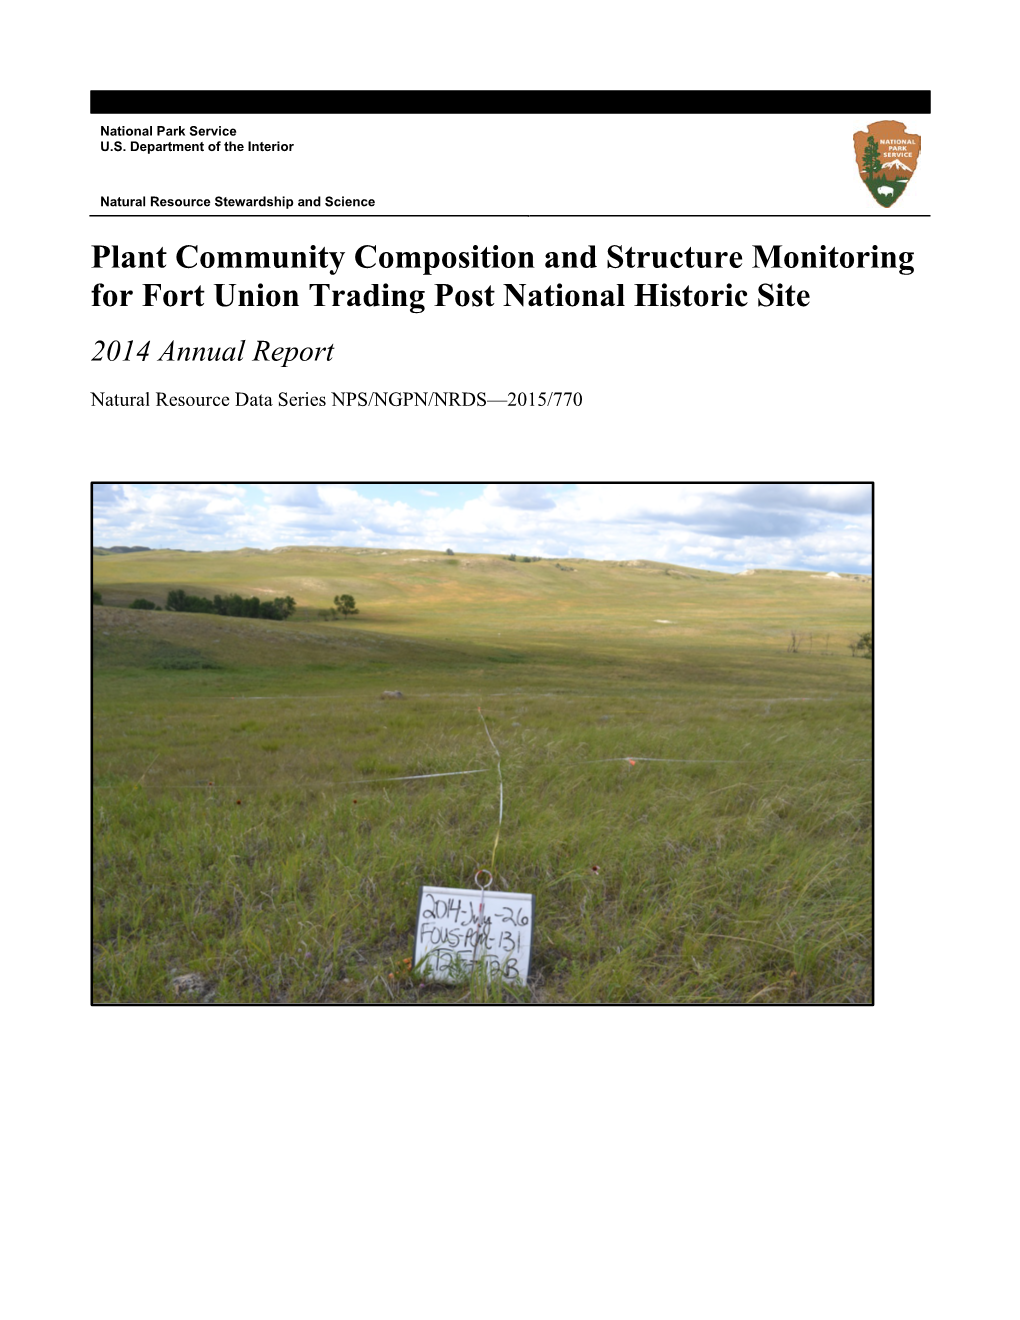 Plant Community Composition and Structure Monitoring for Fort Union Trading Post National Historic Site 2014 Annual Report